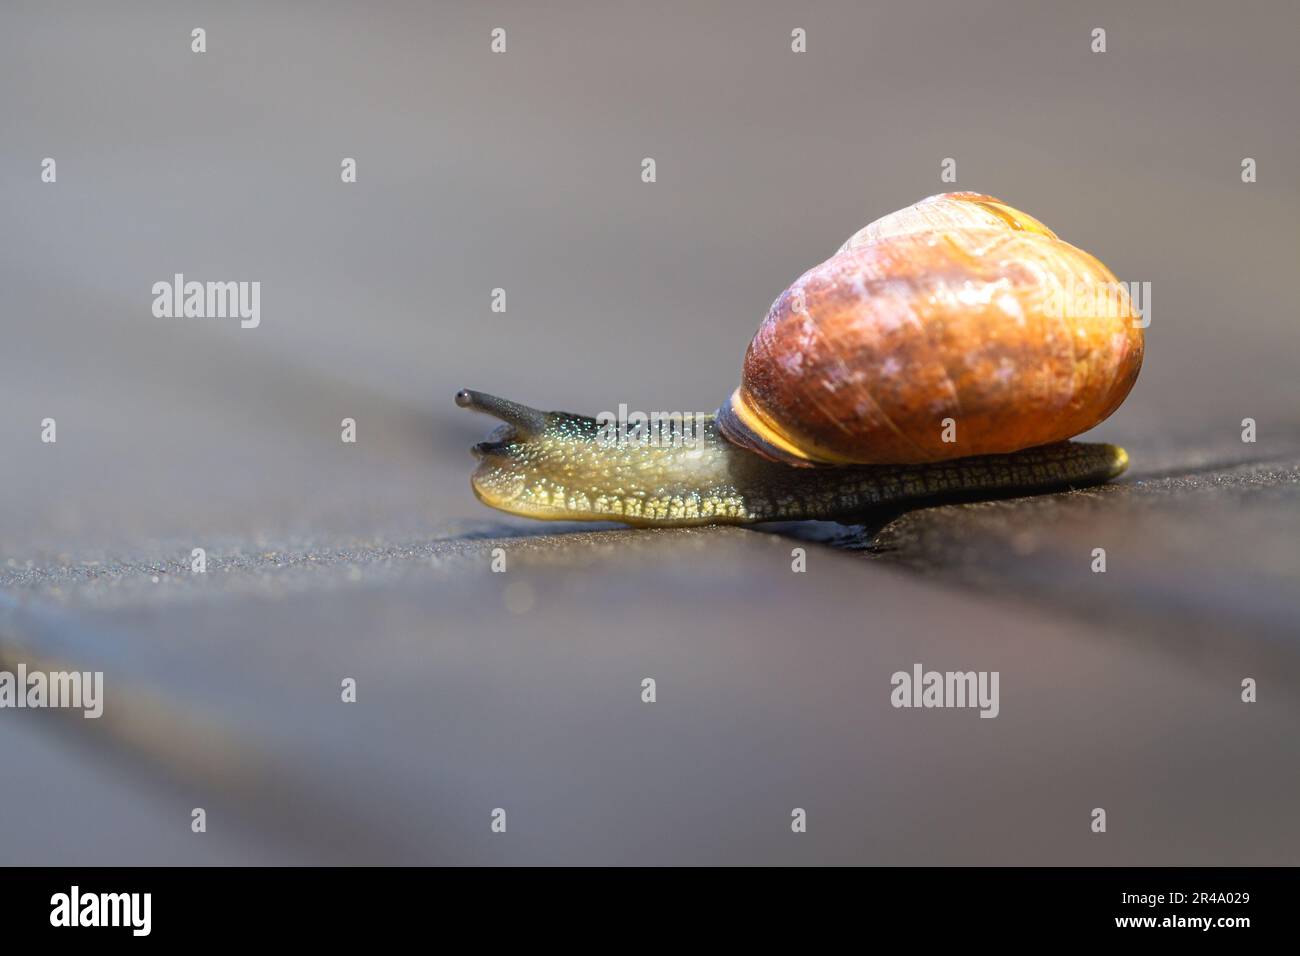 A close-up image of a small snail slowly crawling over a larger one on a dirt road Stock Photo